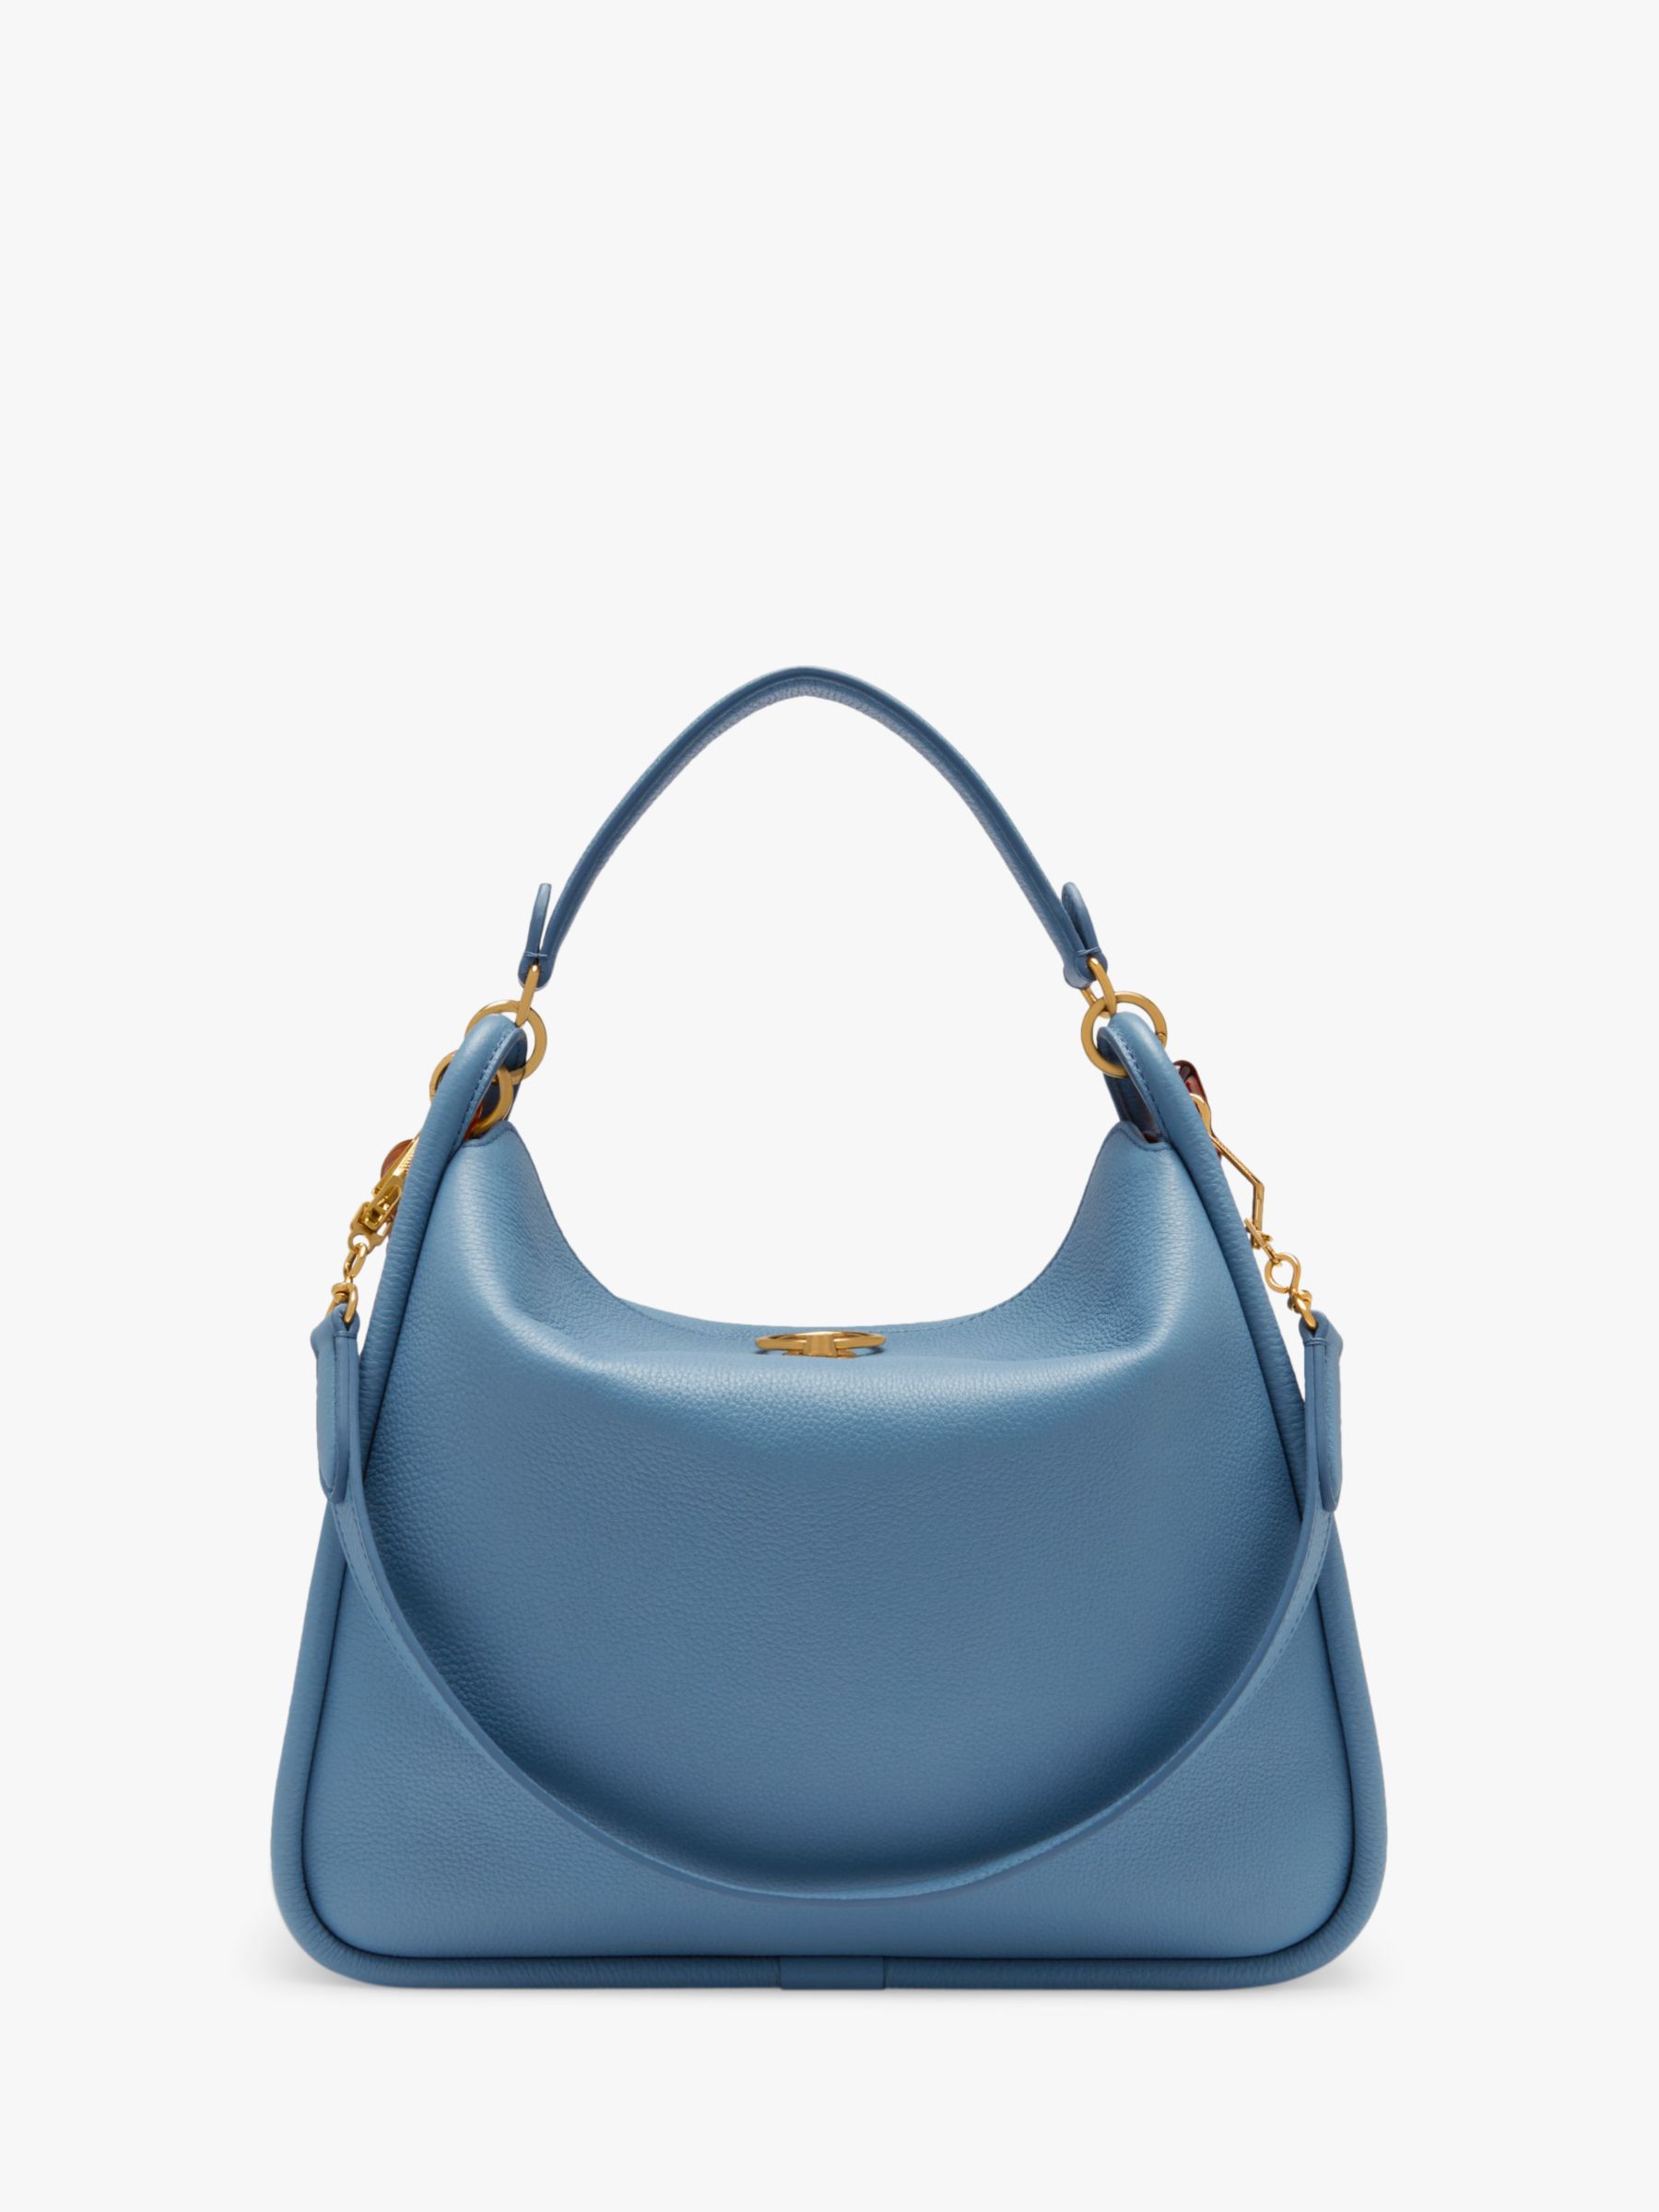 Mulberry Leighton Small Classic Grain Leather Shoulder Bag, Lavender Blue